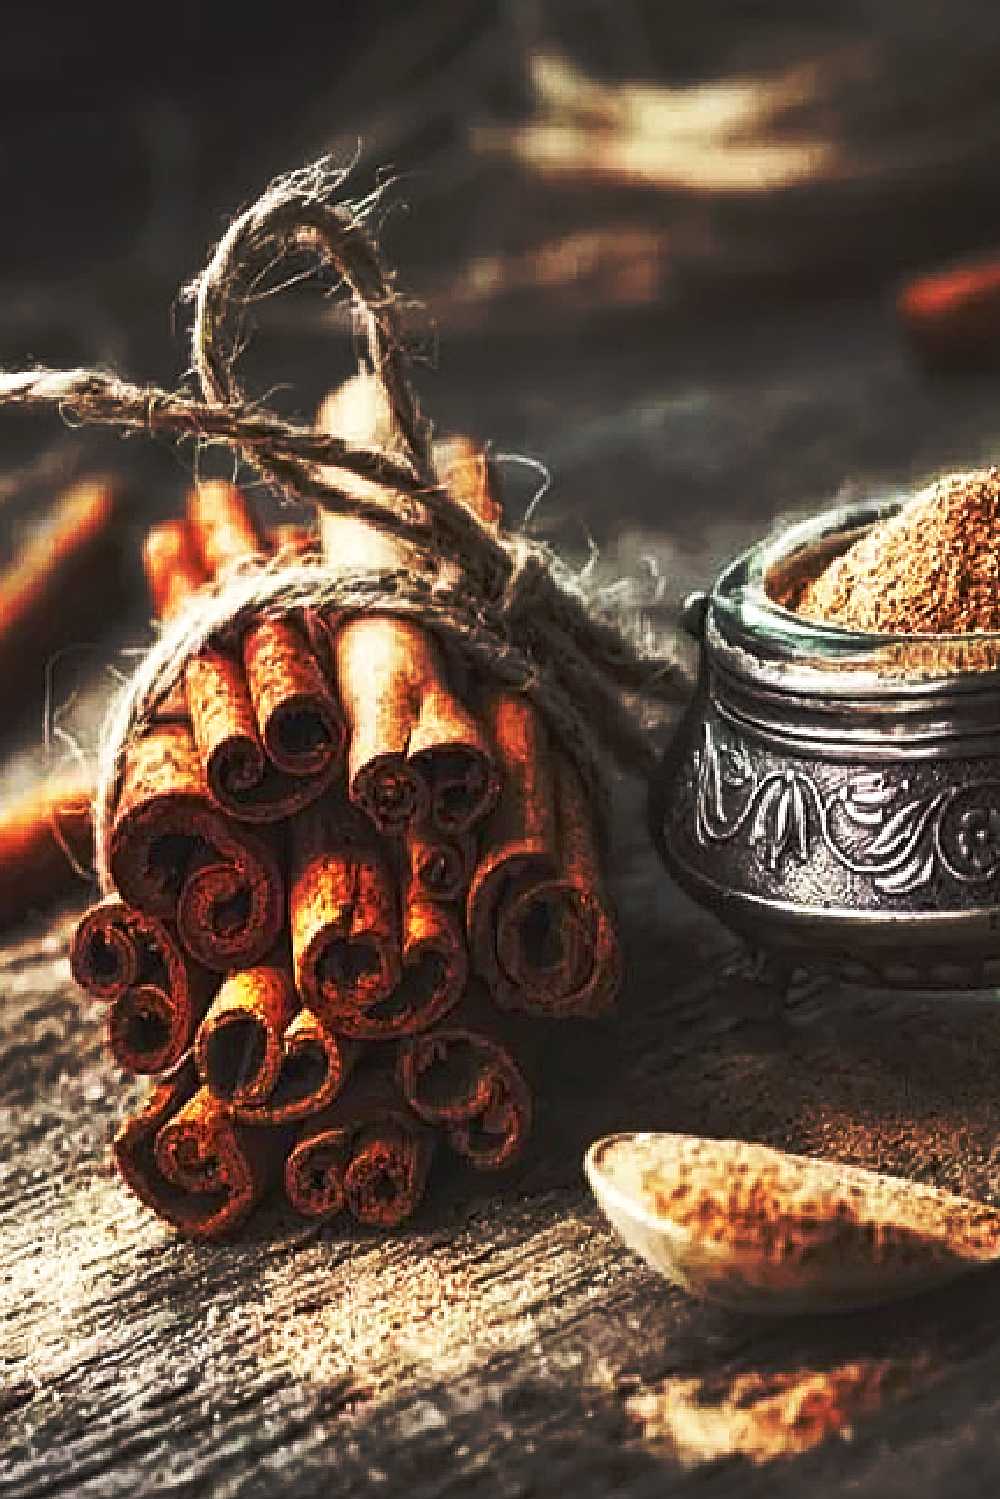 How do you use cinnamon powder for weight loss?